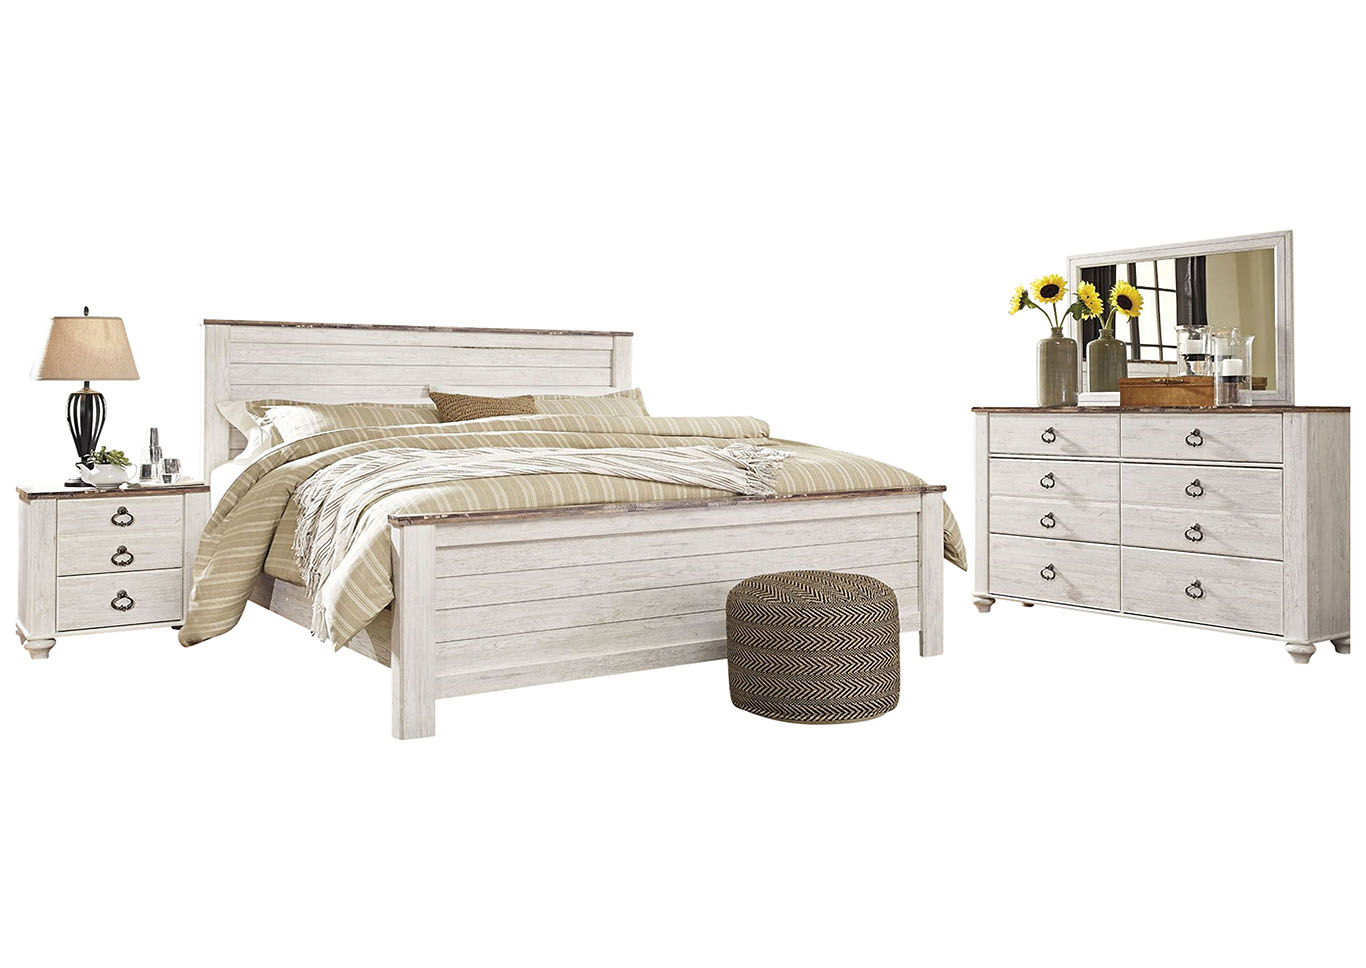 WILLOWTON QUEEN BEDROOM SET,ASHLEY FURNITURE INC.